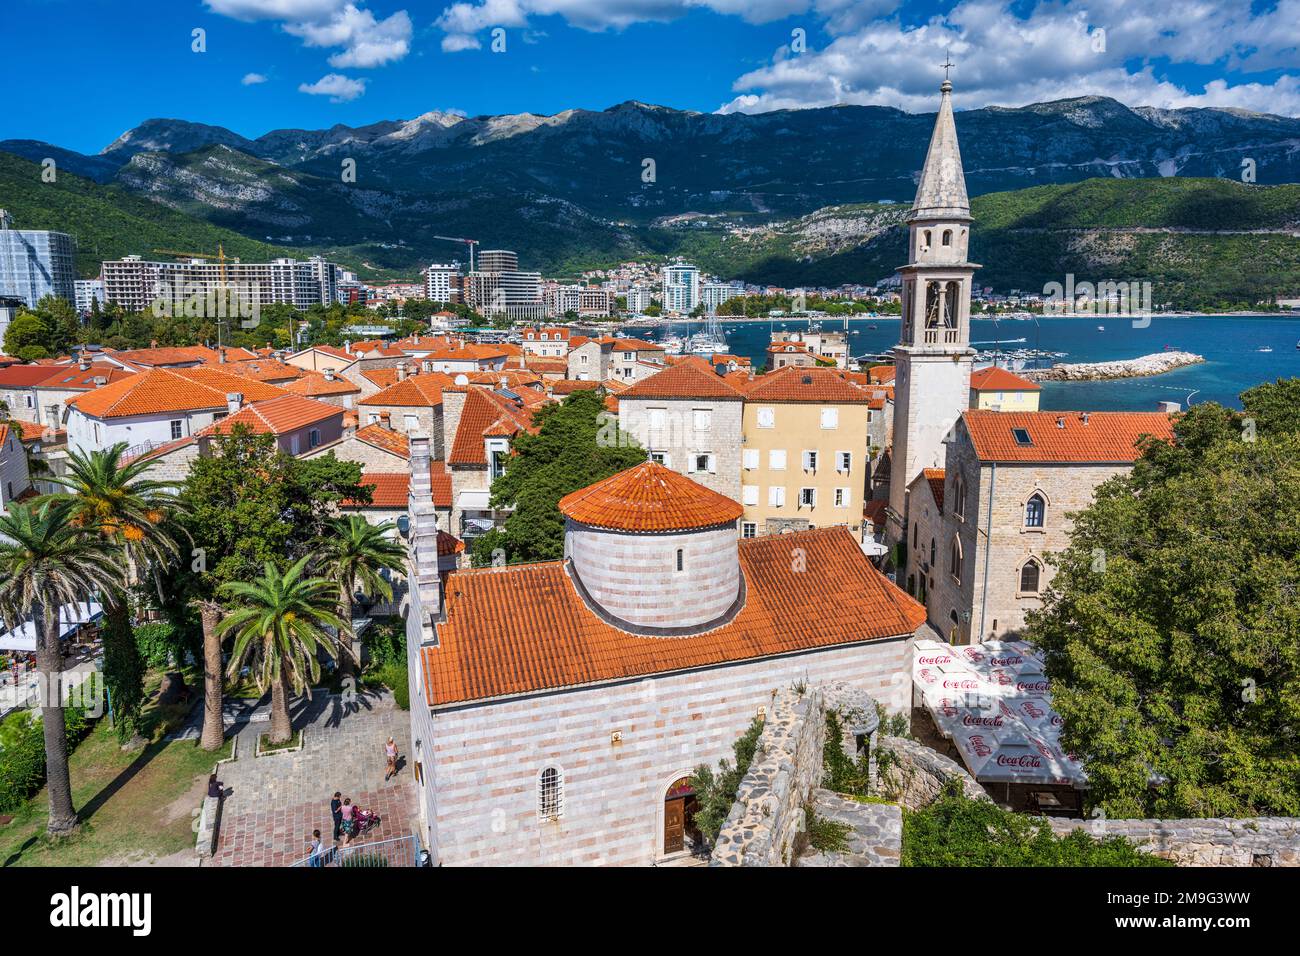 Elevated view of Holy Trinity Church, with bell tower of Saint Ivan Church on the right, in the old town of Budva on the Adriatic Coast of Montenegro Stock Photo